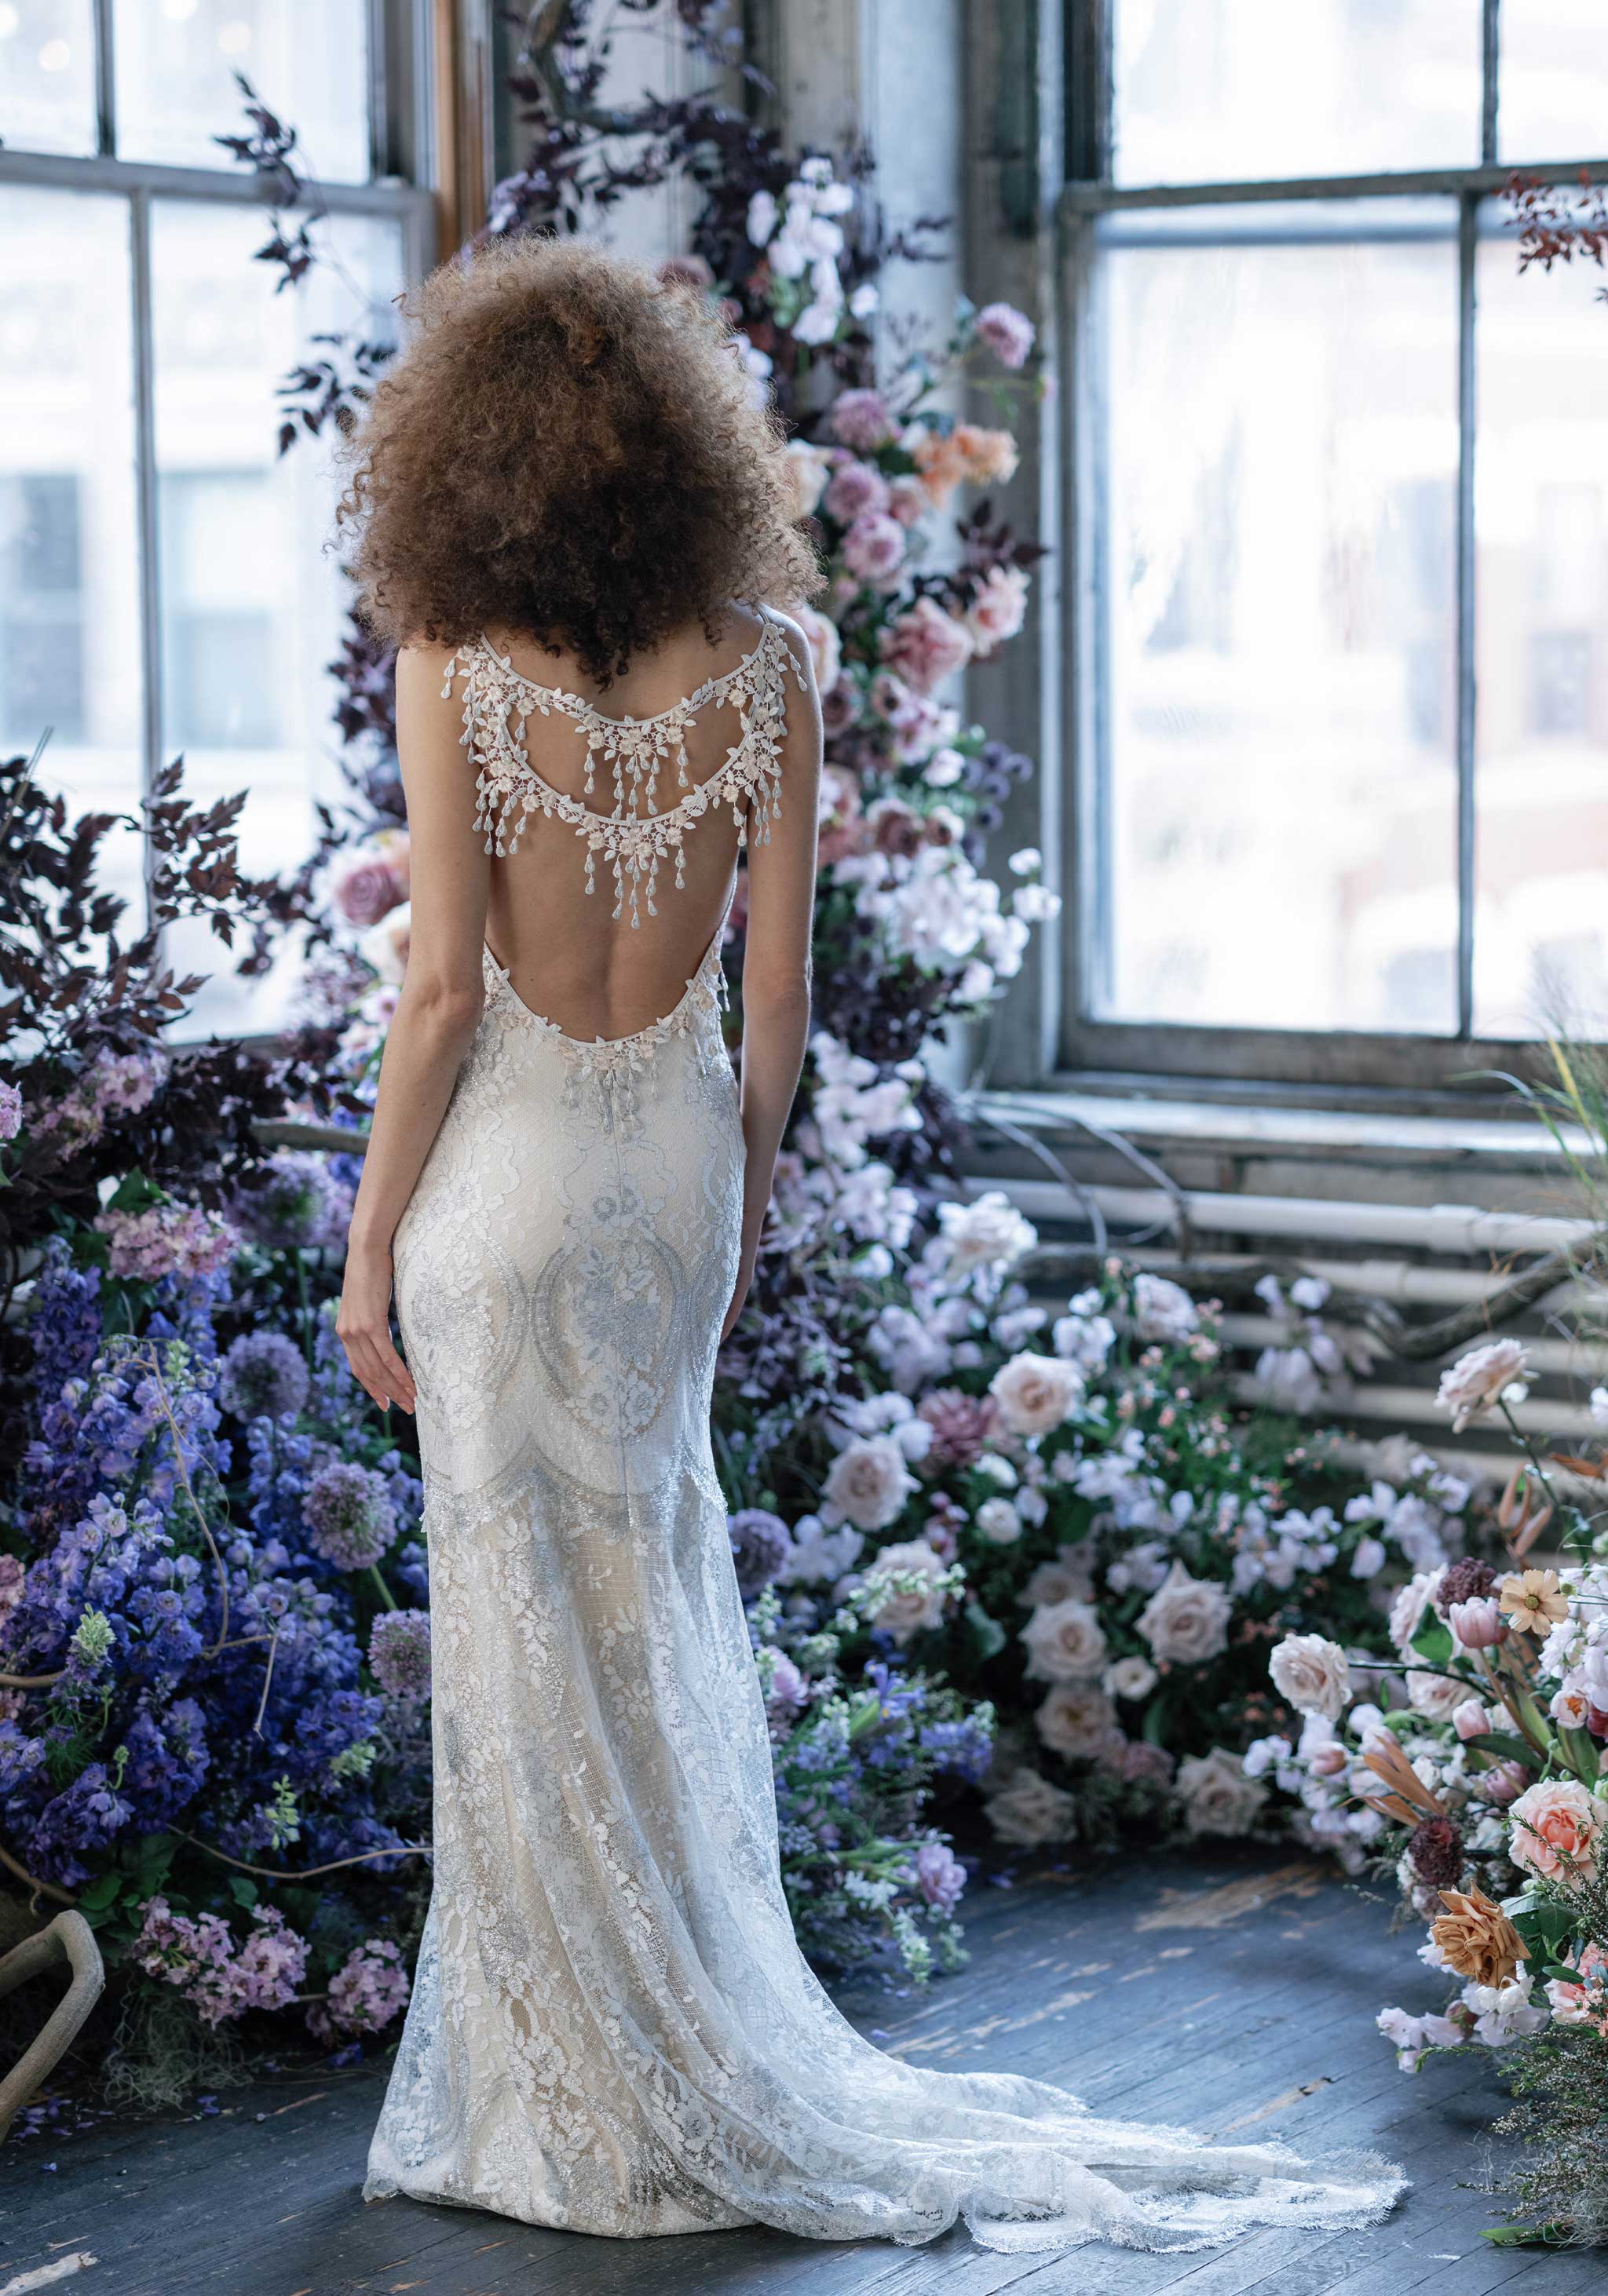 22 Wedding Dresses That Wowed from the Back